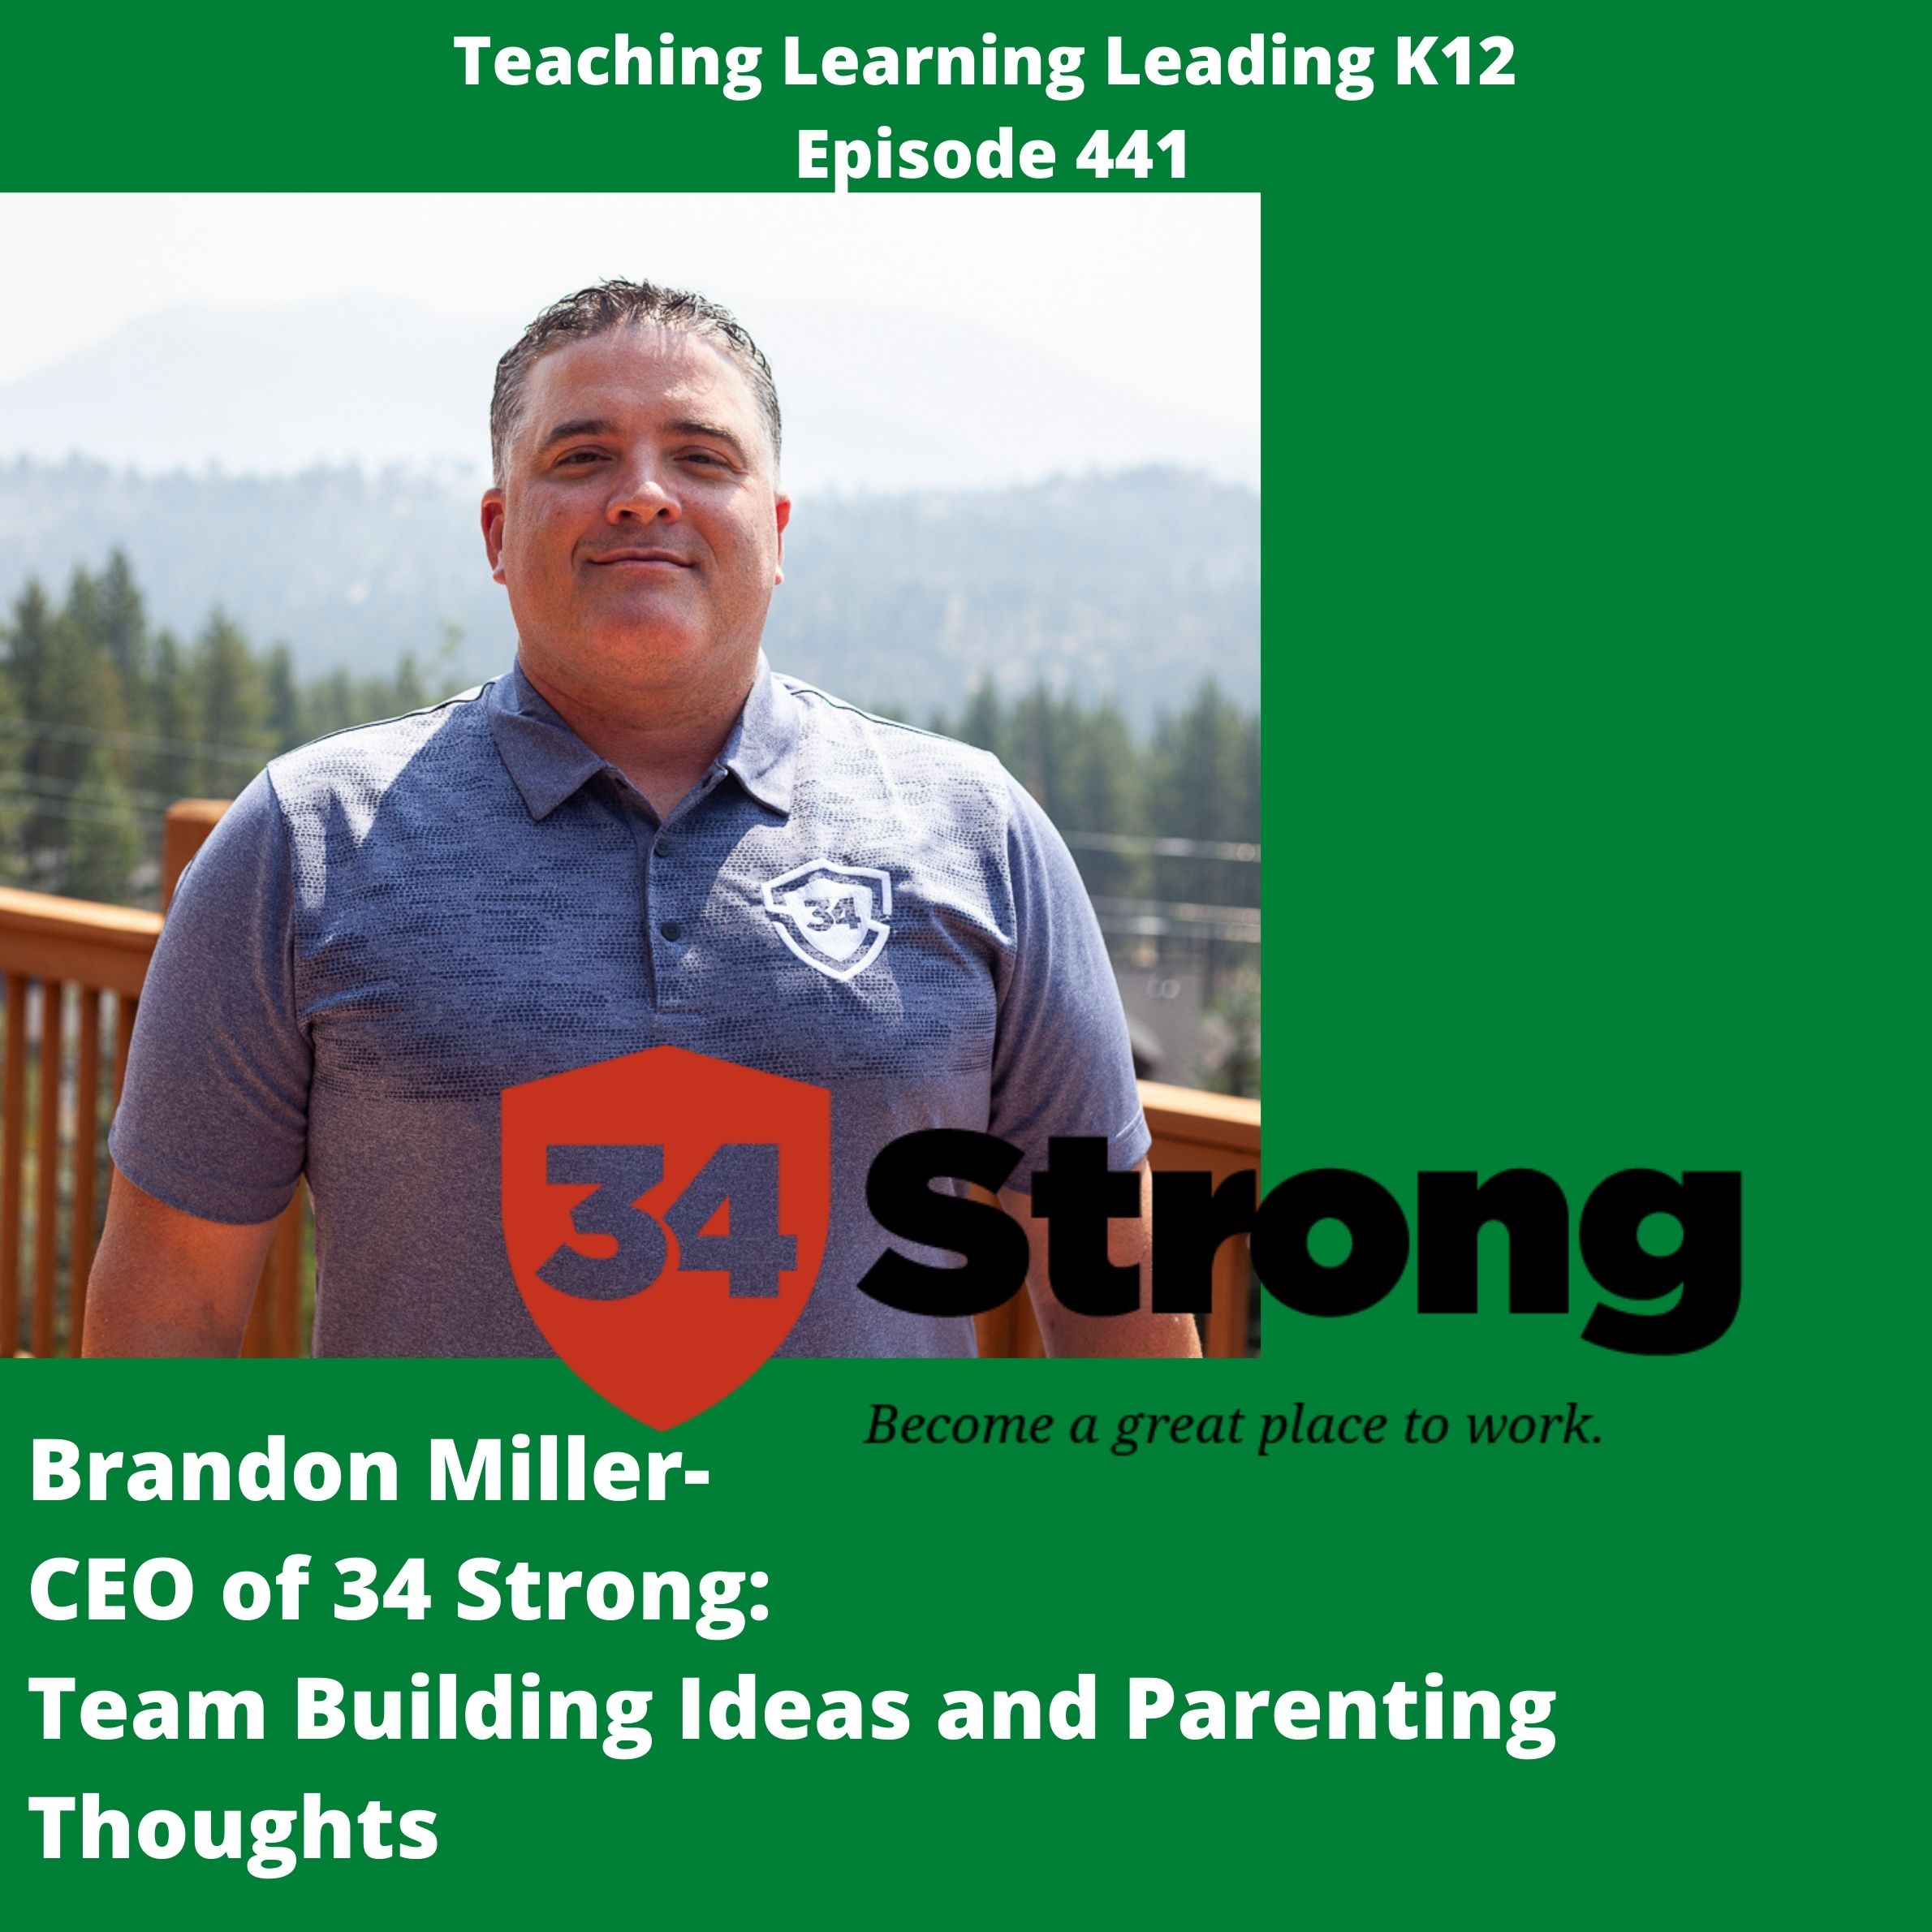 Brandon Miller - CEO of 34 Strong - Team Building Ideas and Parenting Thoughts - 441 Image